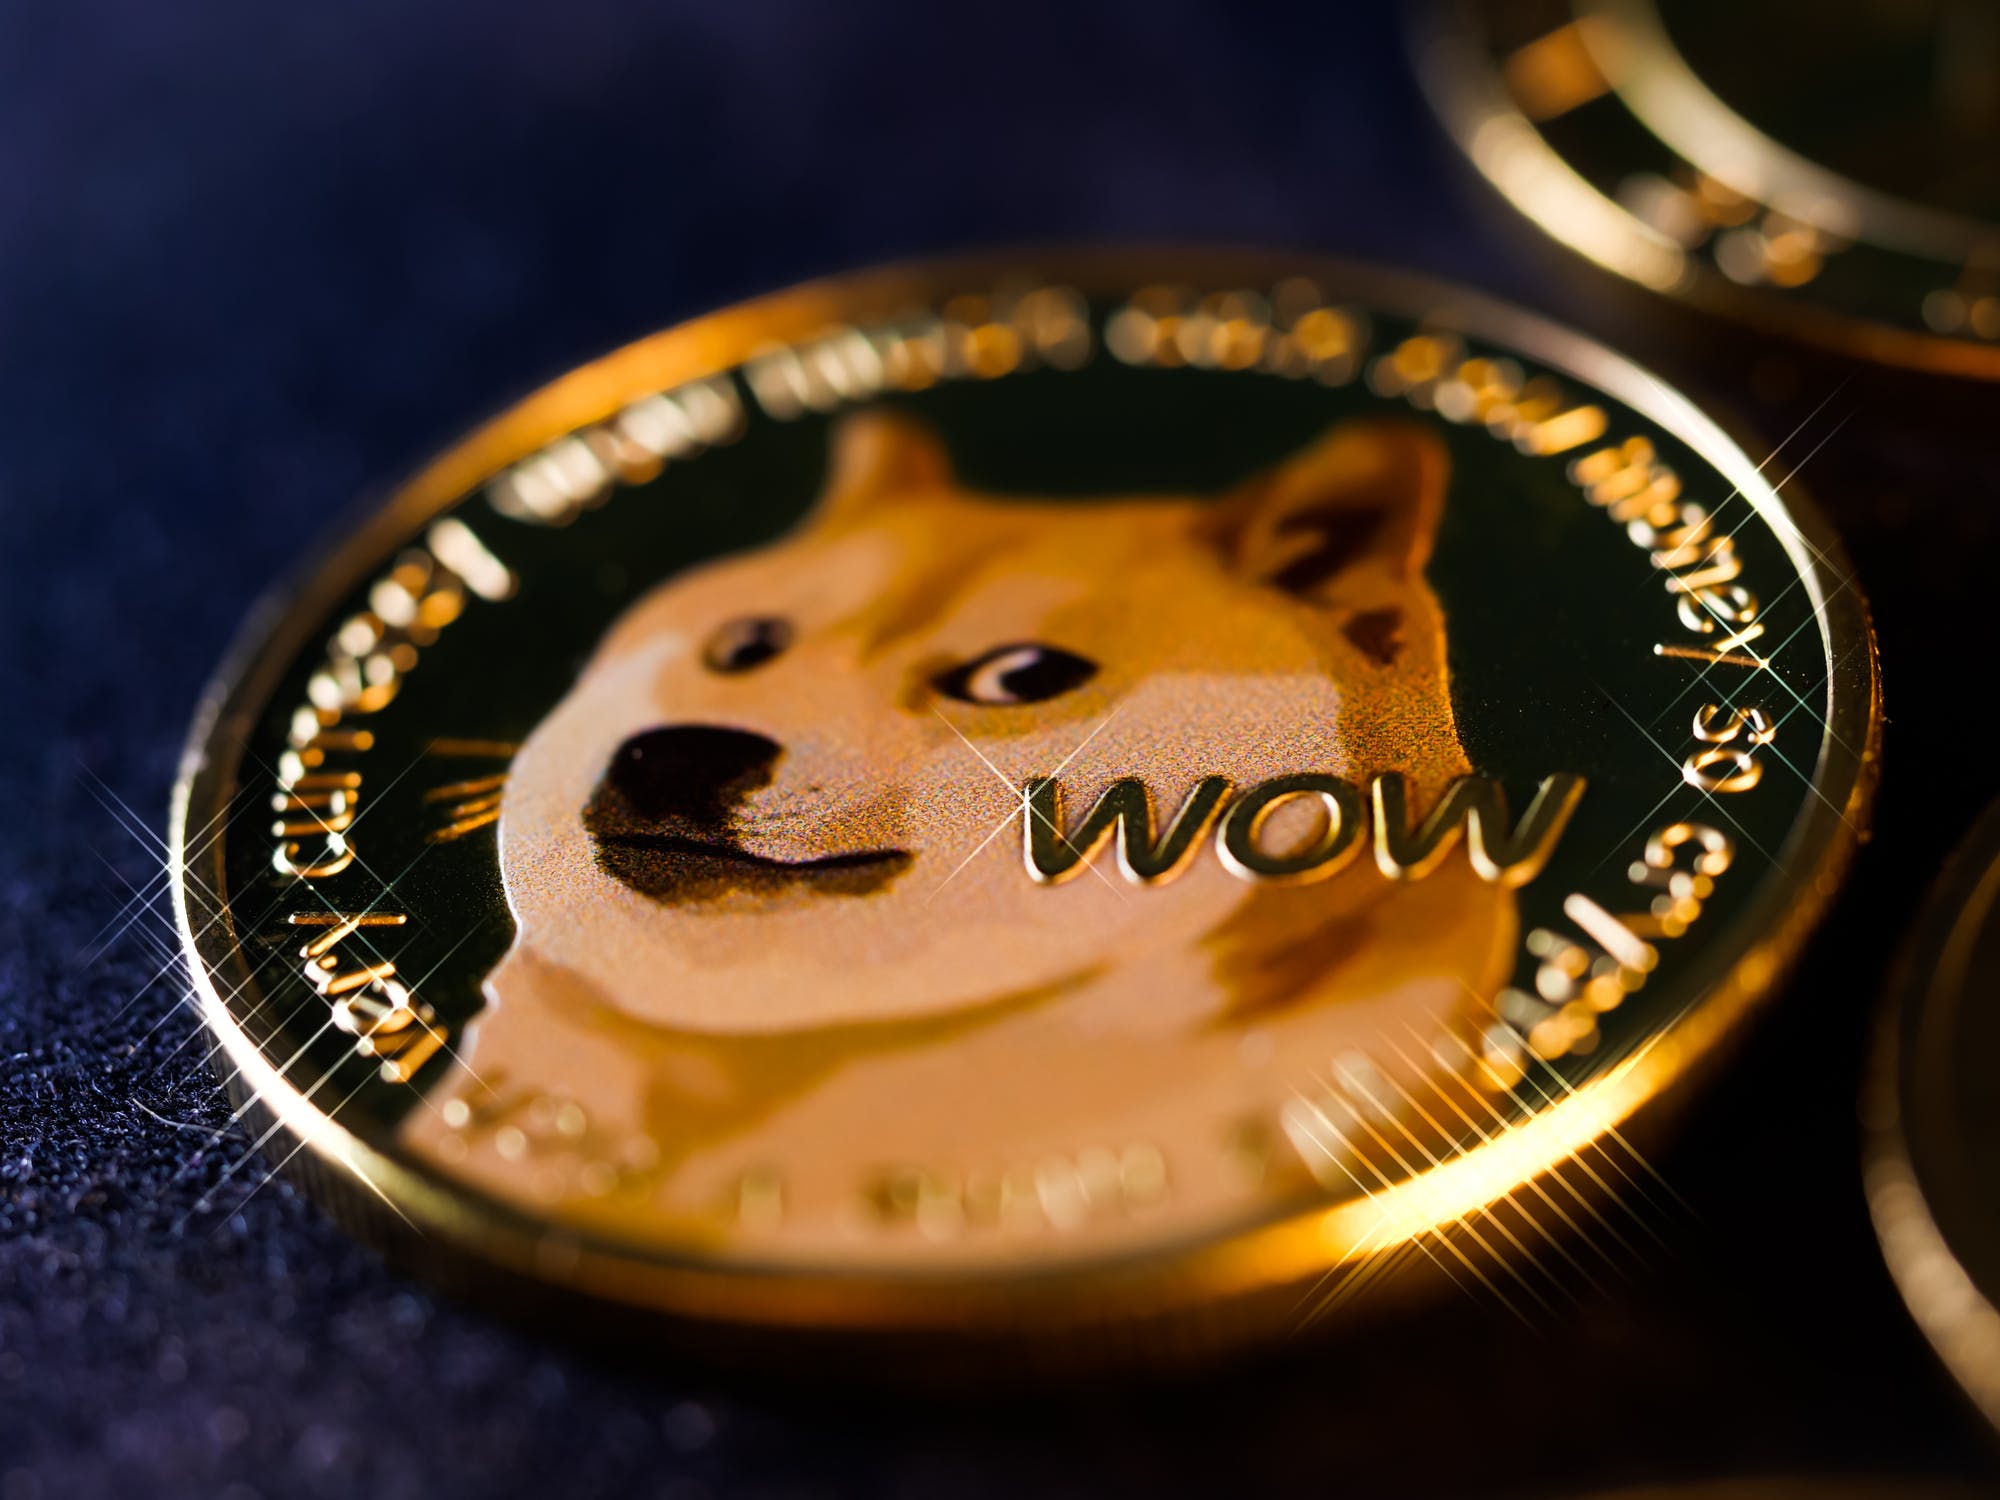 Who amongst the two cryptocurrencies shiba inu and dogecoin will win the race